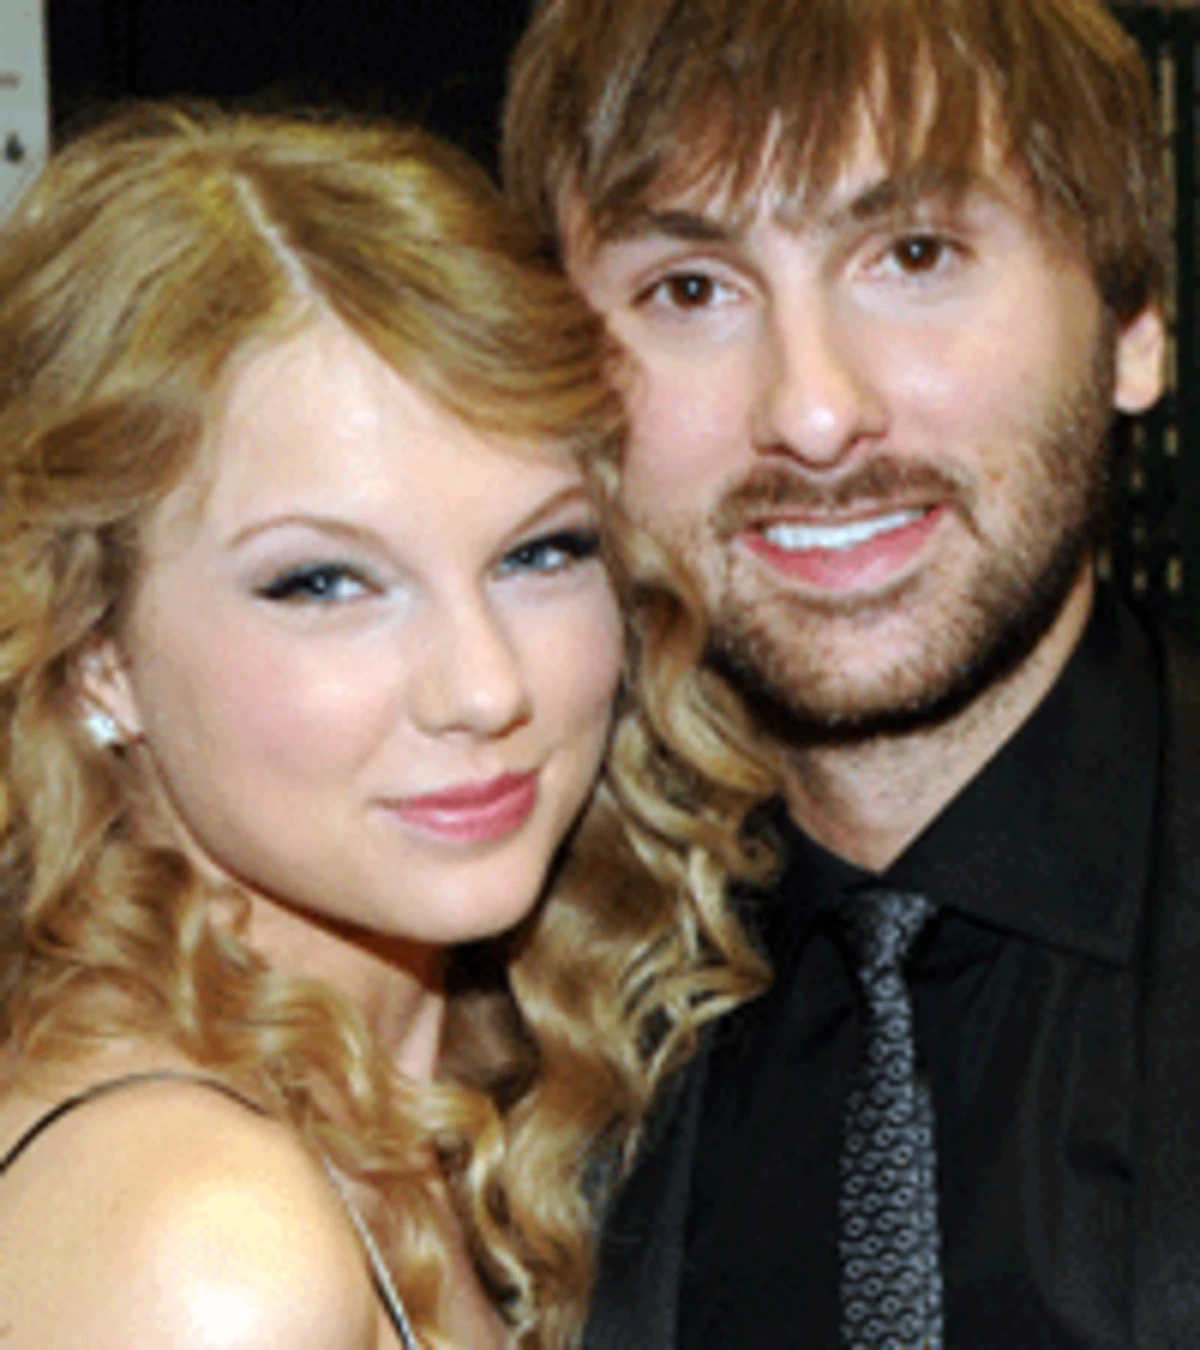 2012 Kids’ Choice Awards Nominees Include Taylor Swift, Lady Antebellum